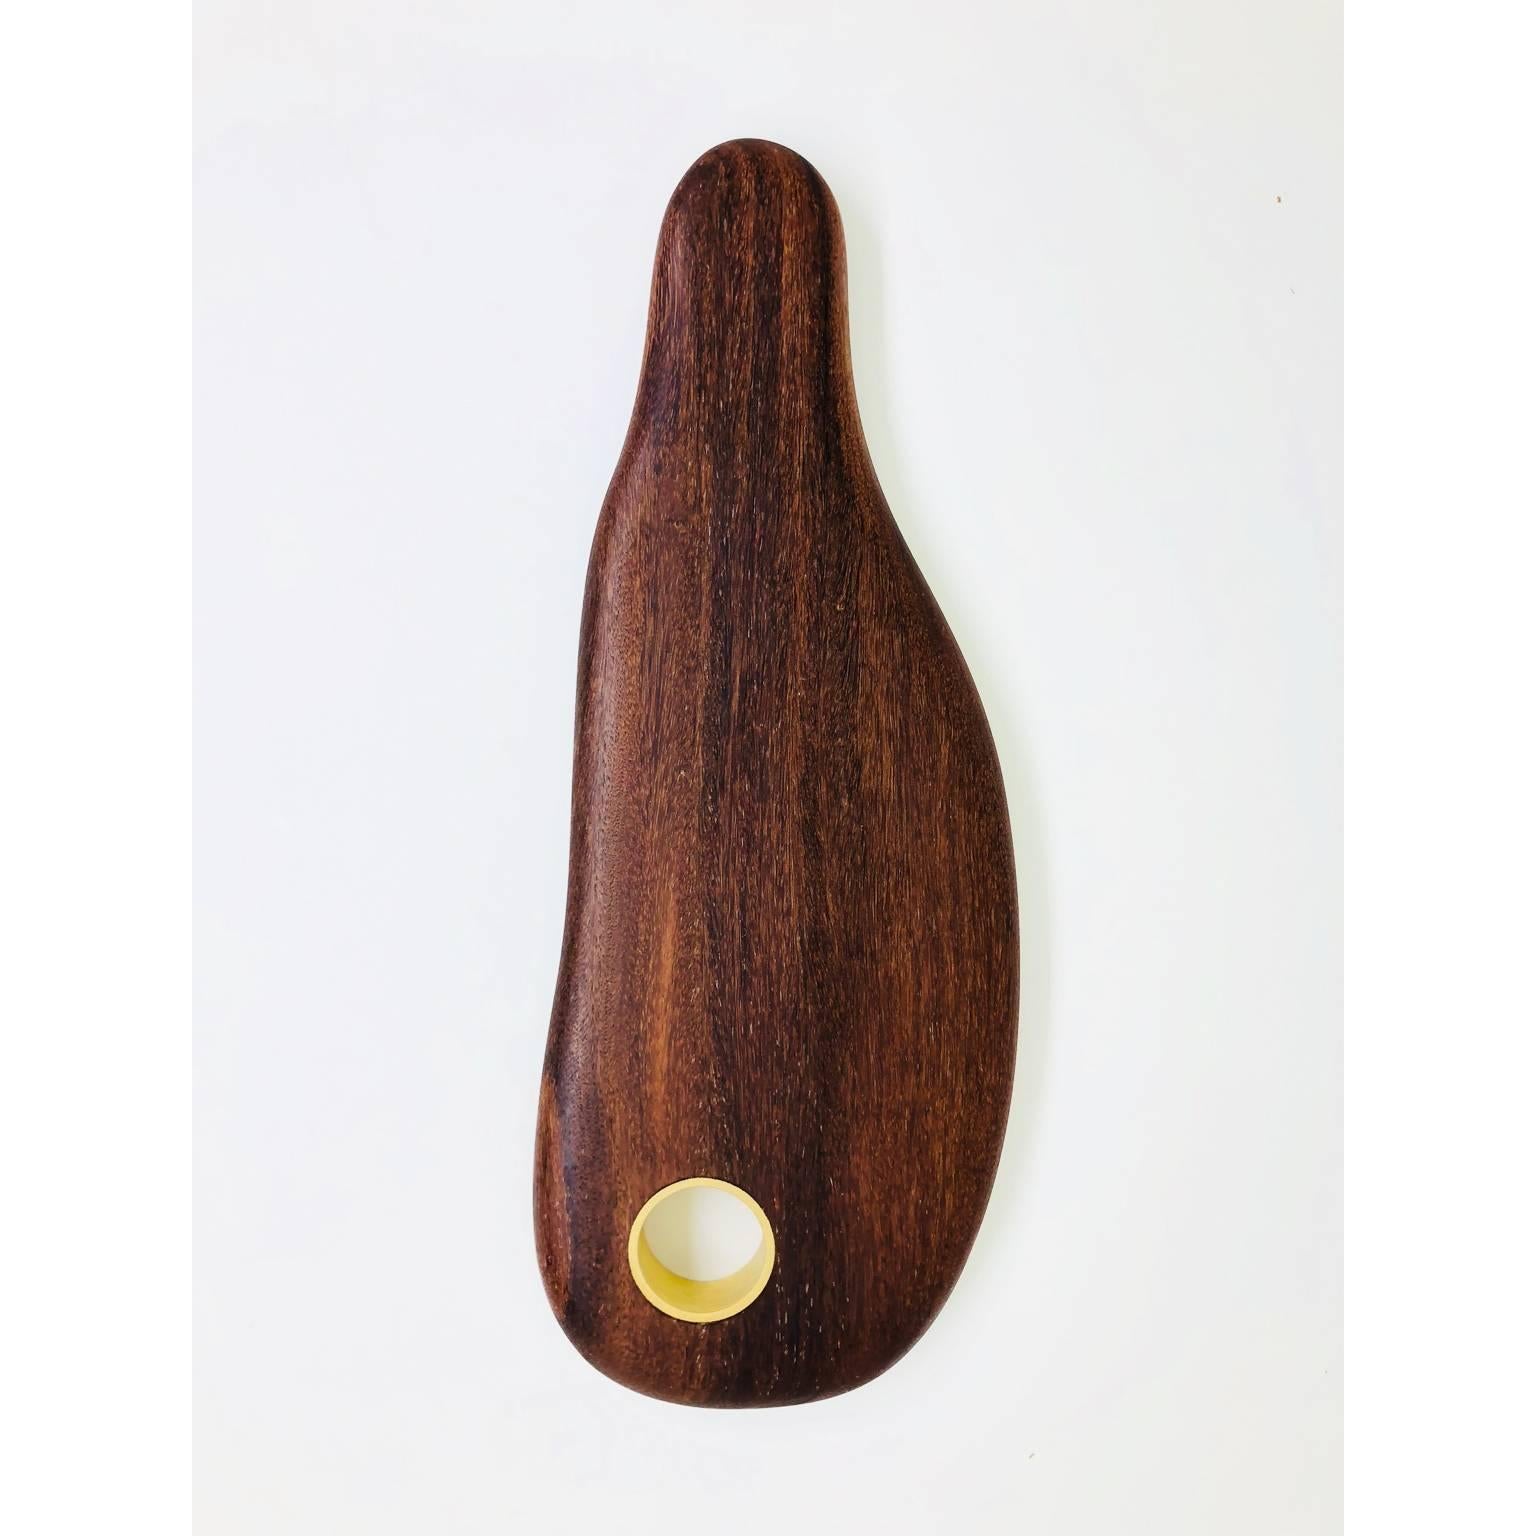 The cutting gourmet board is made in Brazilian solid wood Sucupira with brass insert. Finishing in mineral oil suitable for food.
To maintain the cutting gourmet board after use, wash in cold water with a neutral soap. Leave in an open surface to